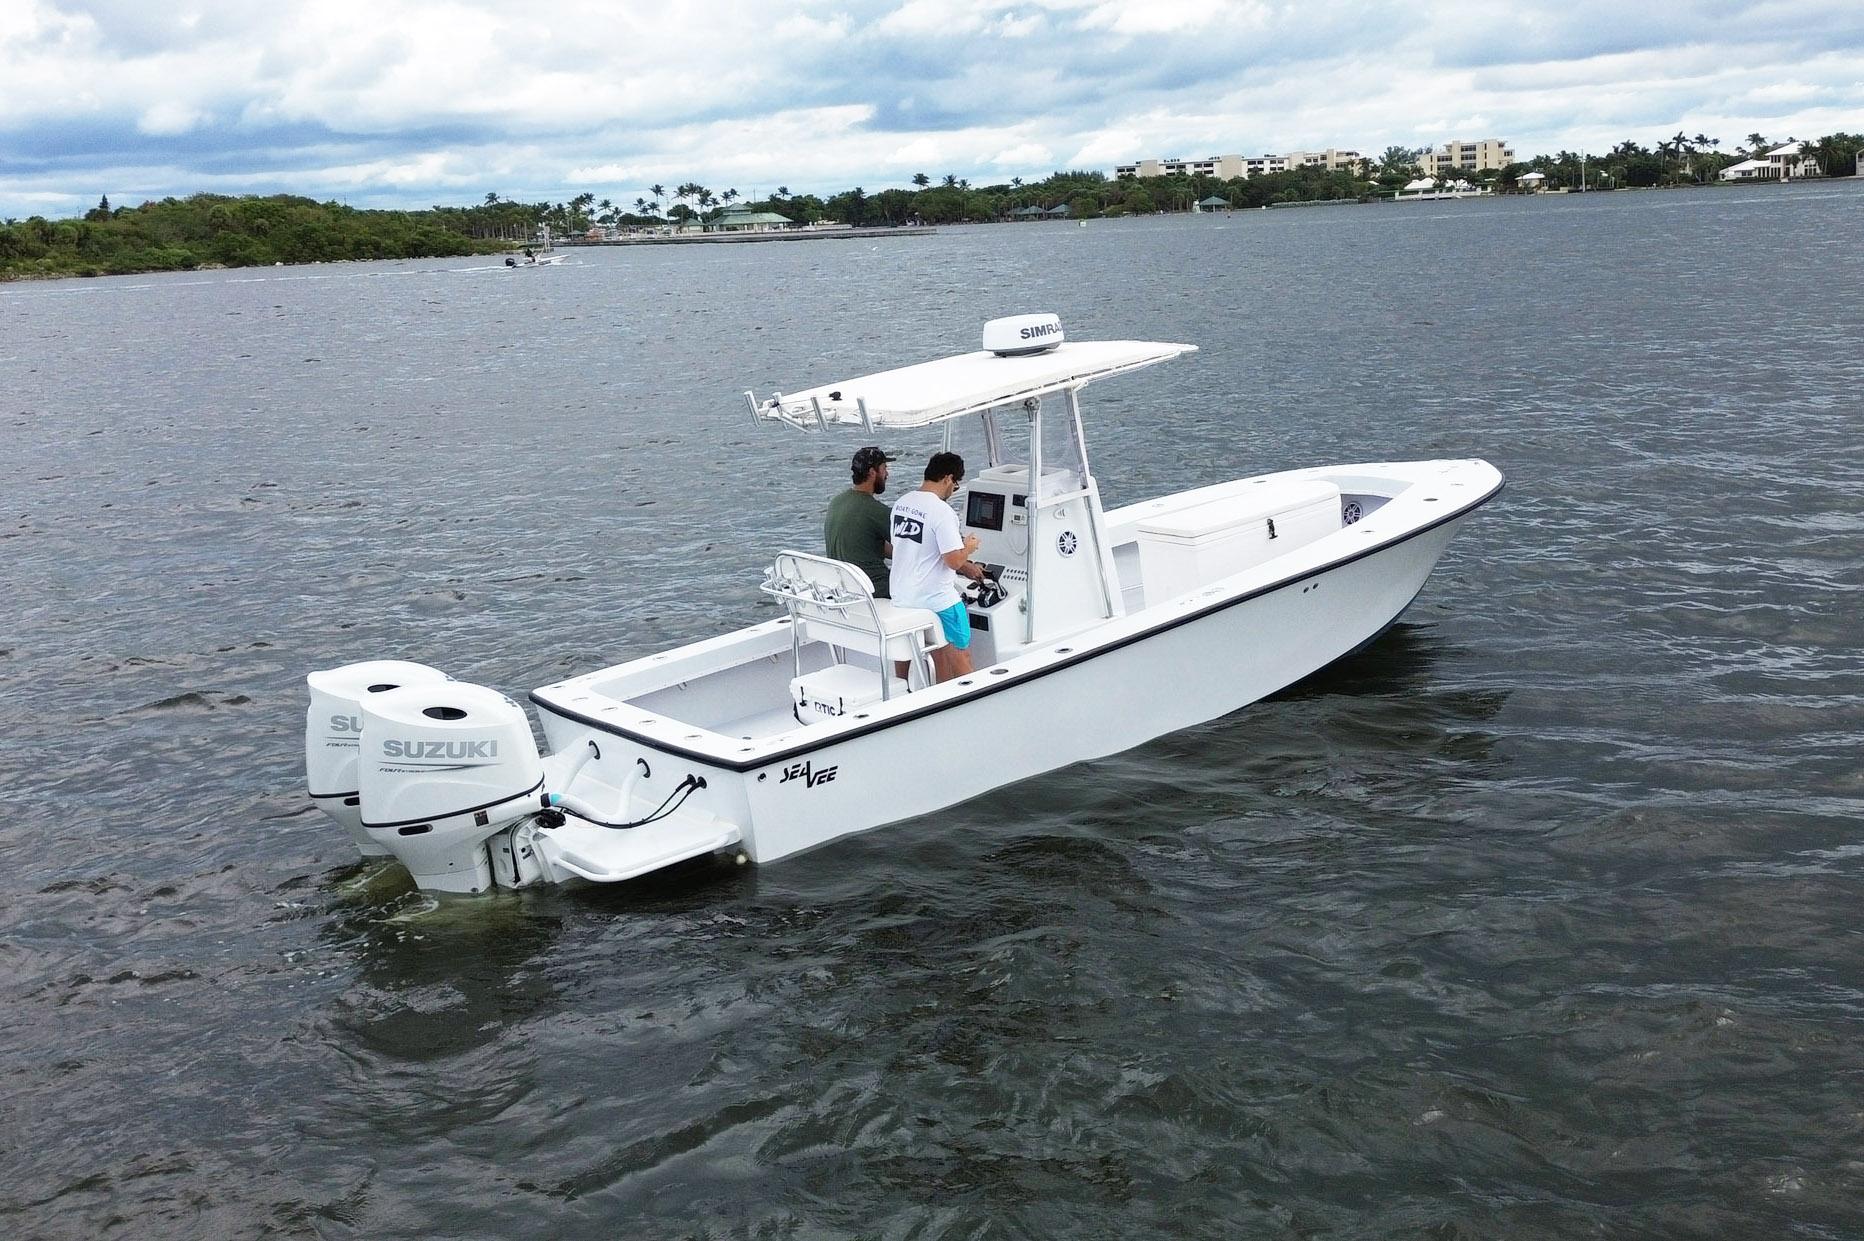 1983 SeaVee 25 Center Console - RESTORED AND REPOWERED